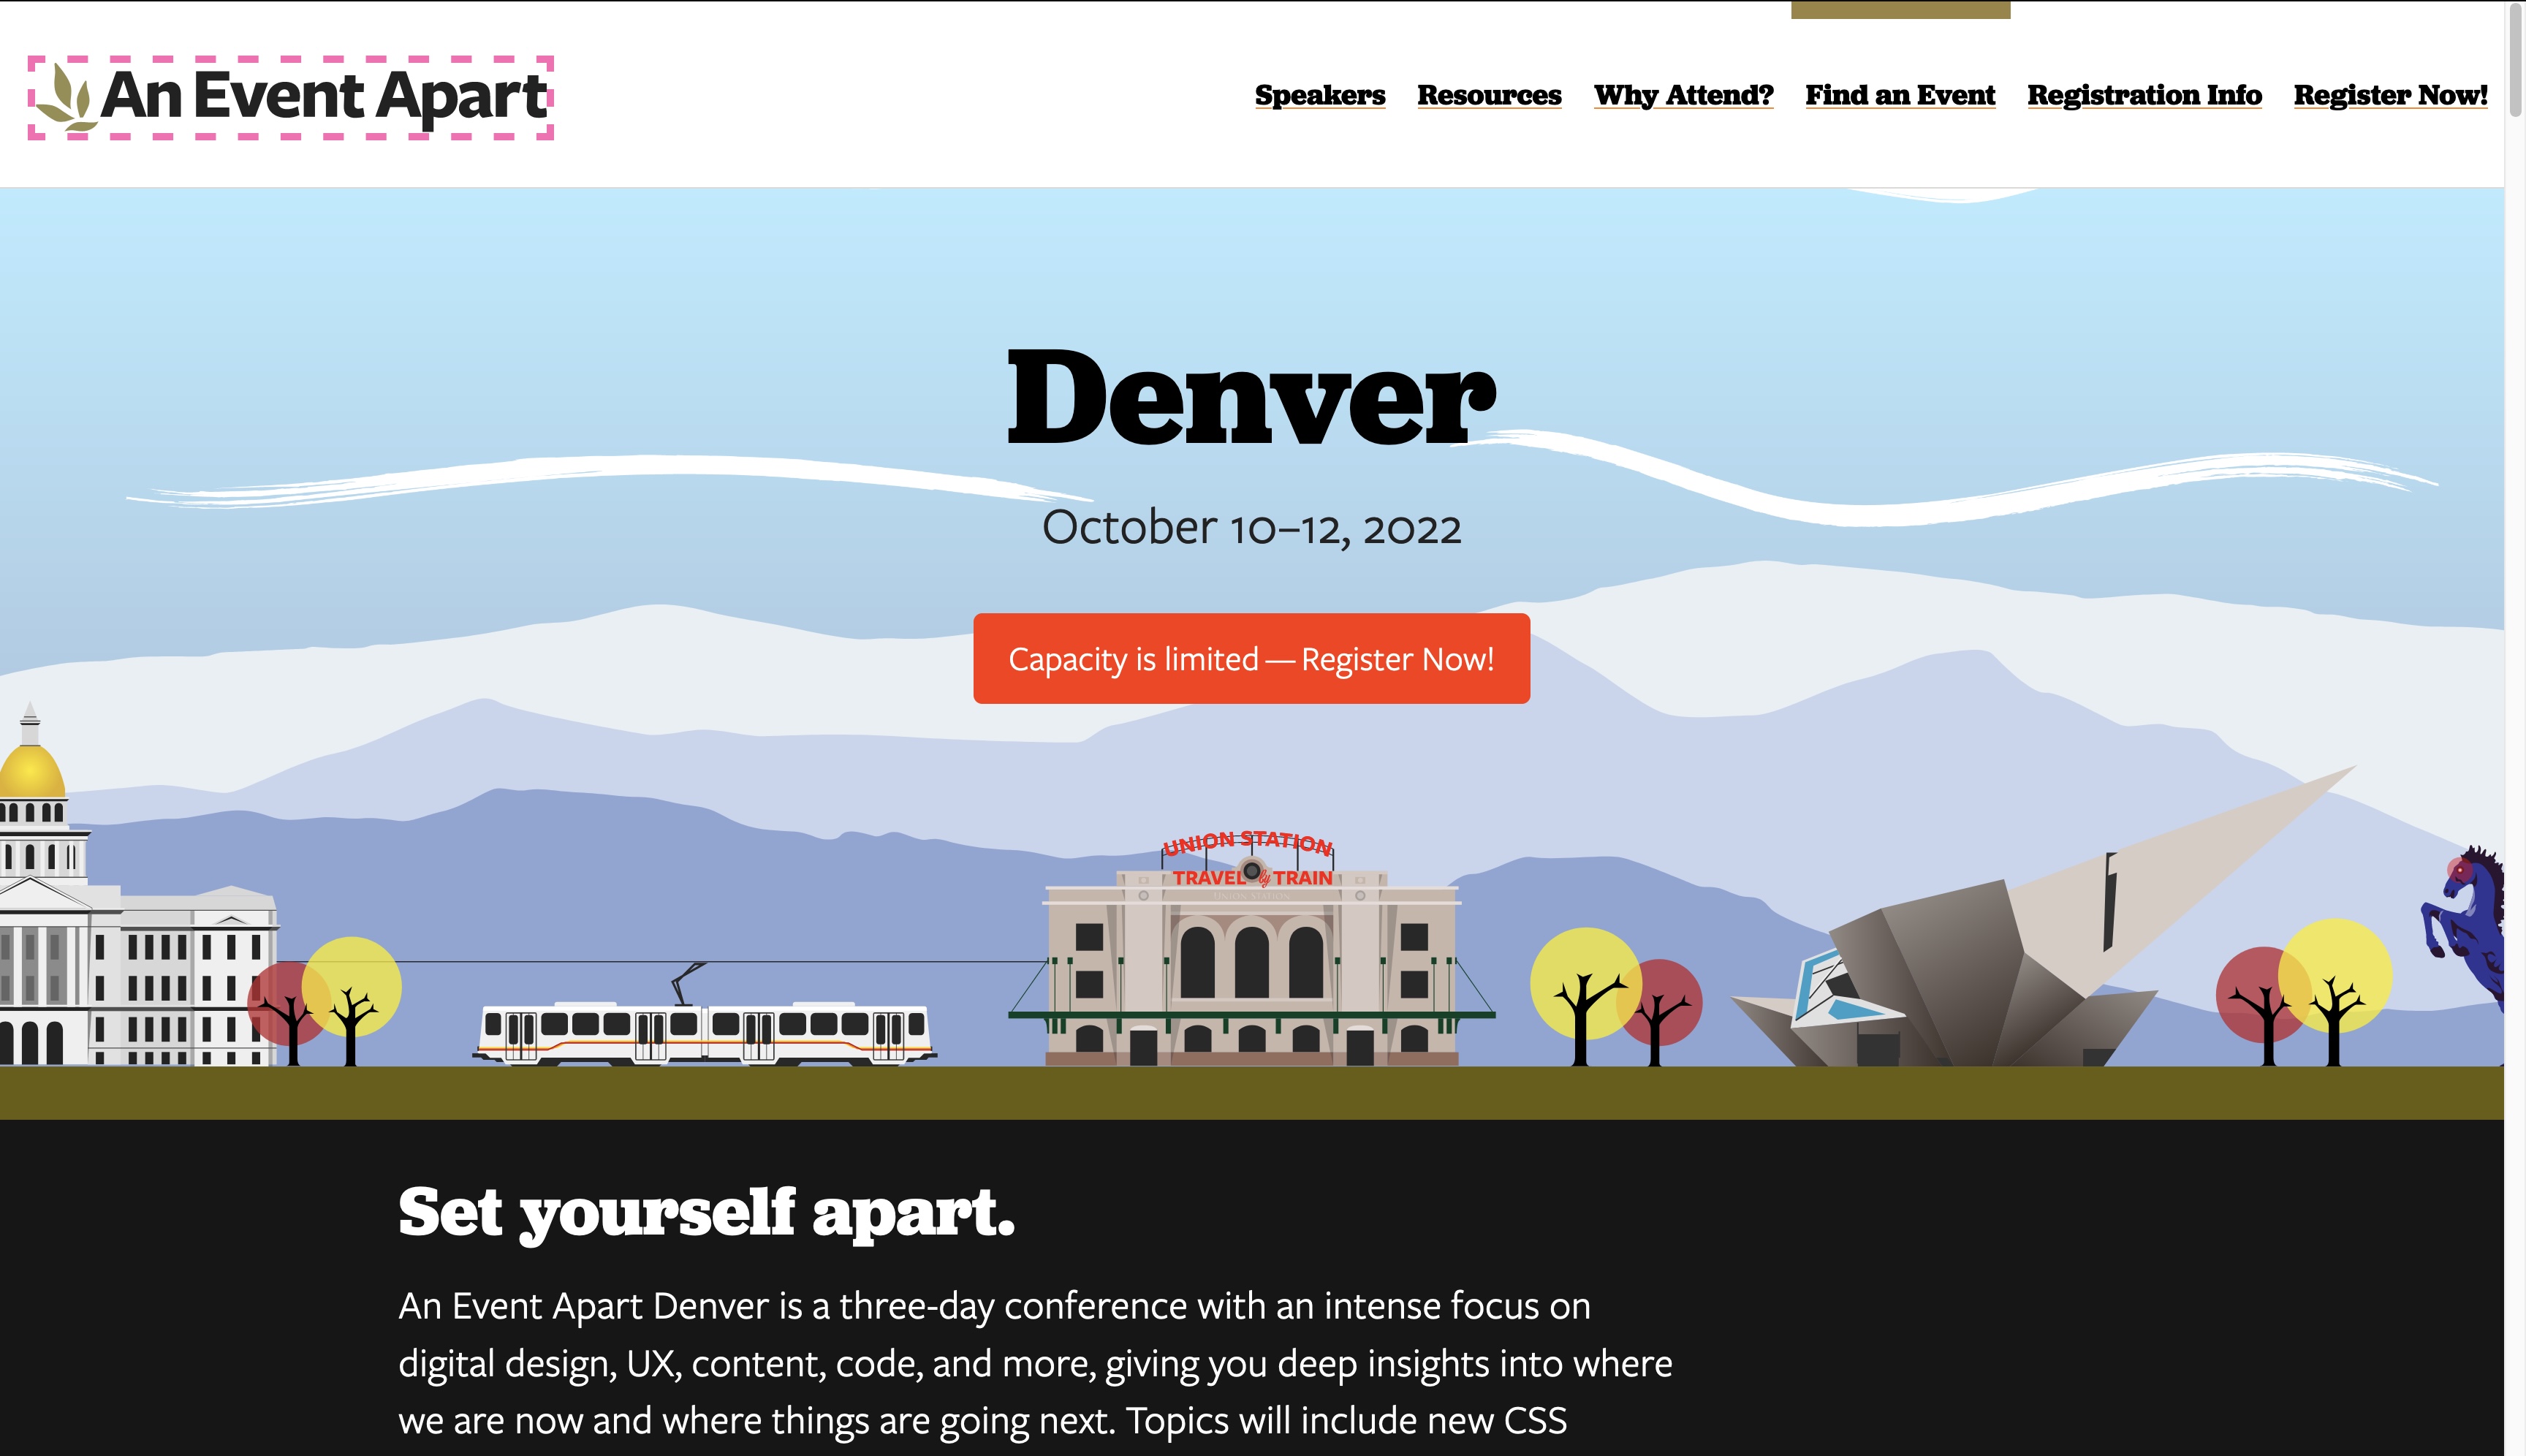 AEA Denver website
with an hotpink dashed outline
around only the logo
